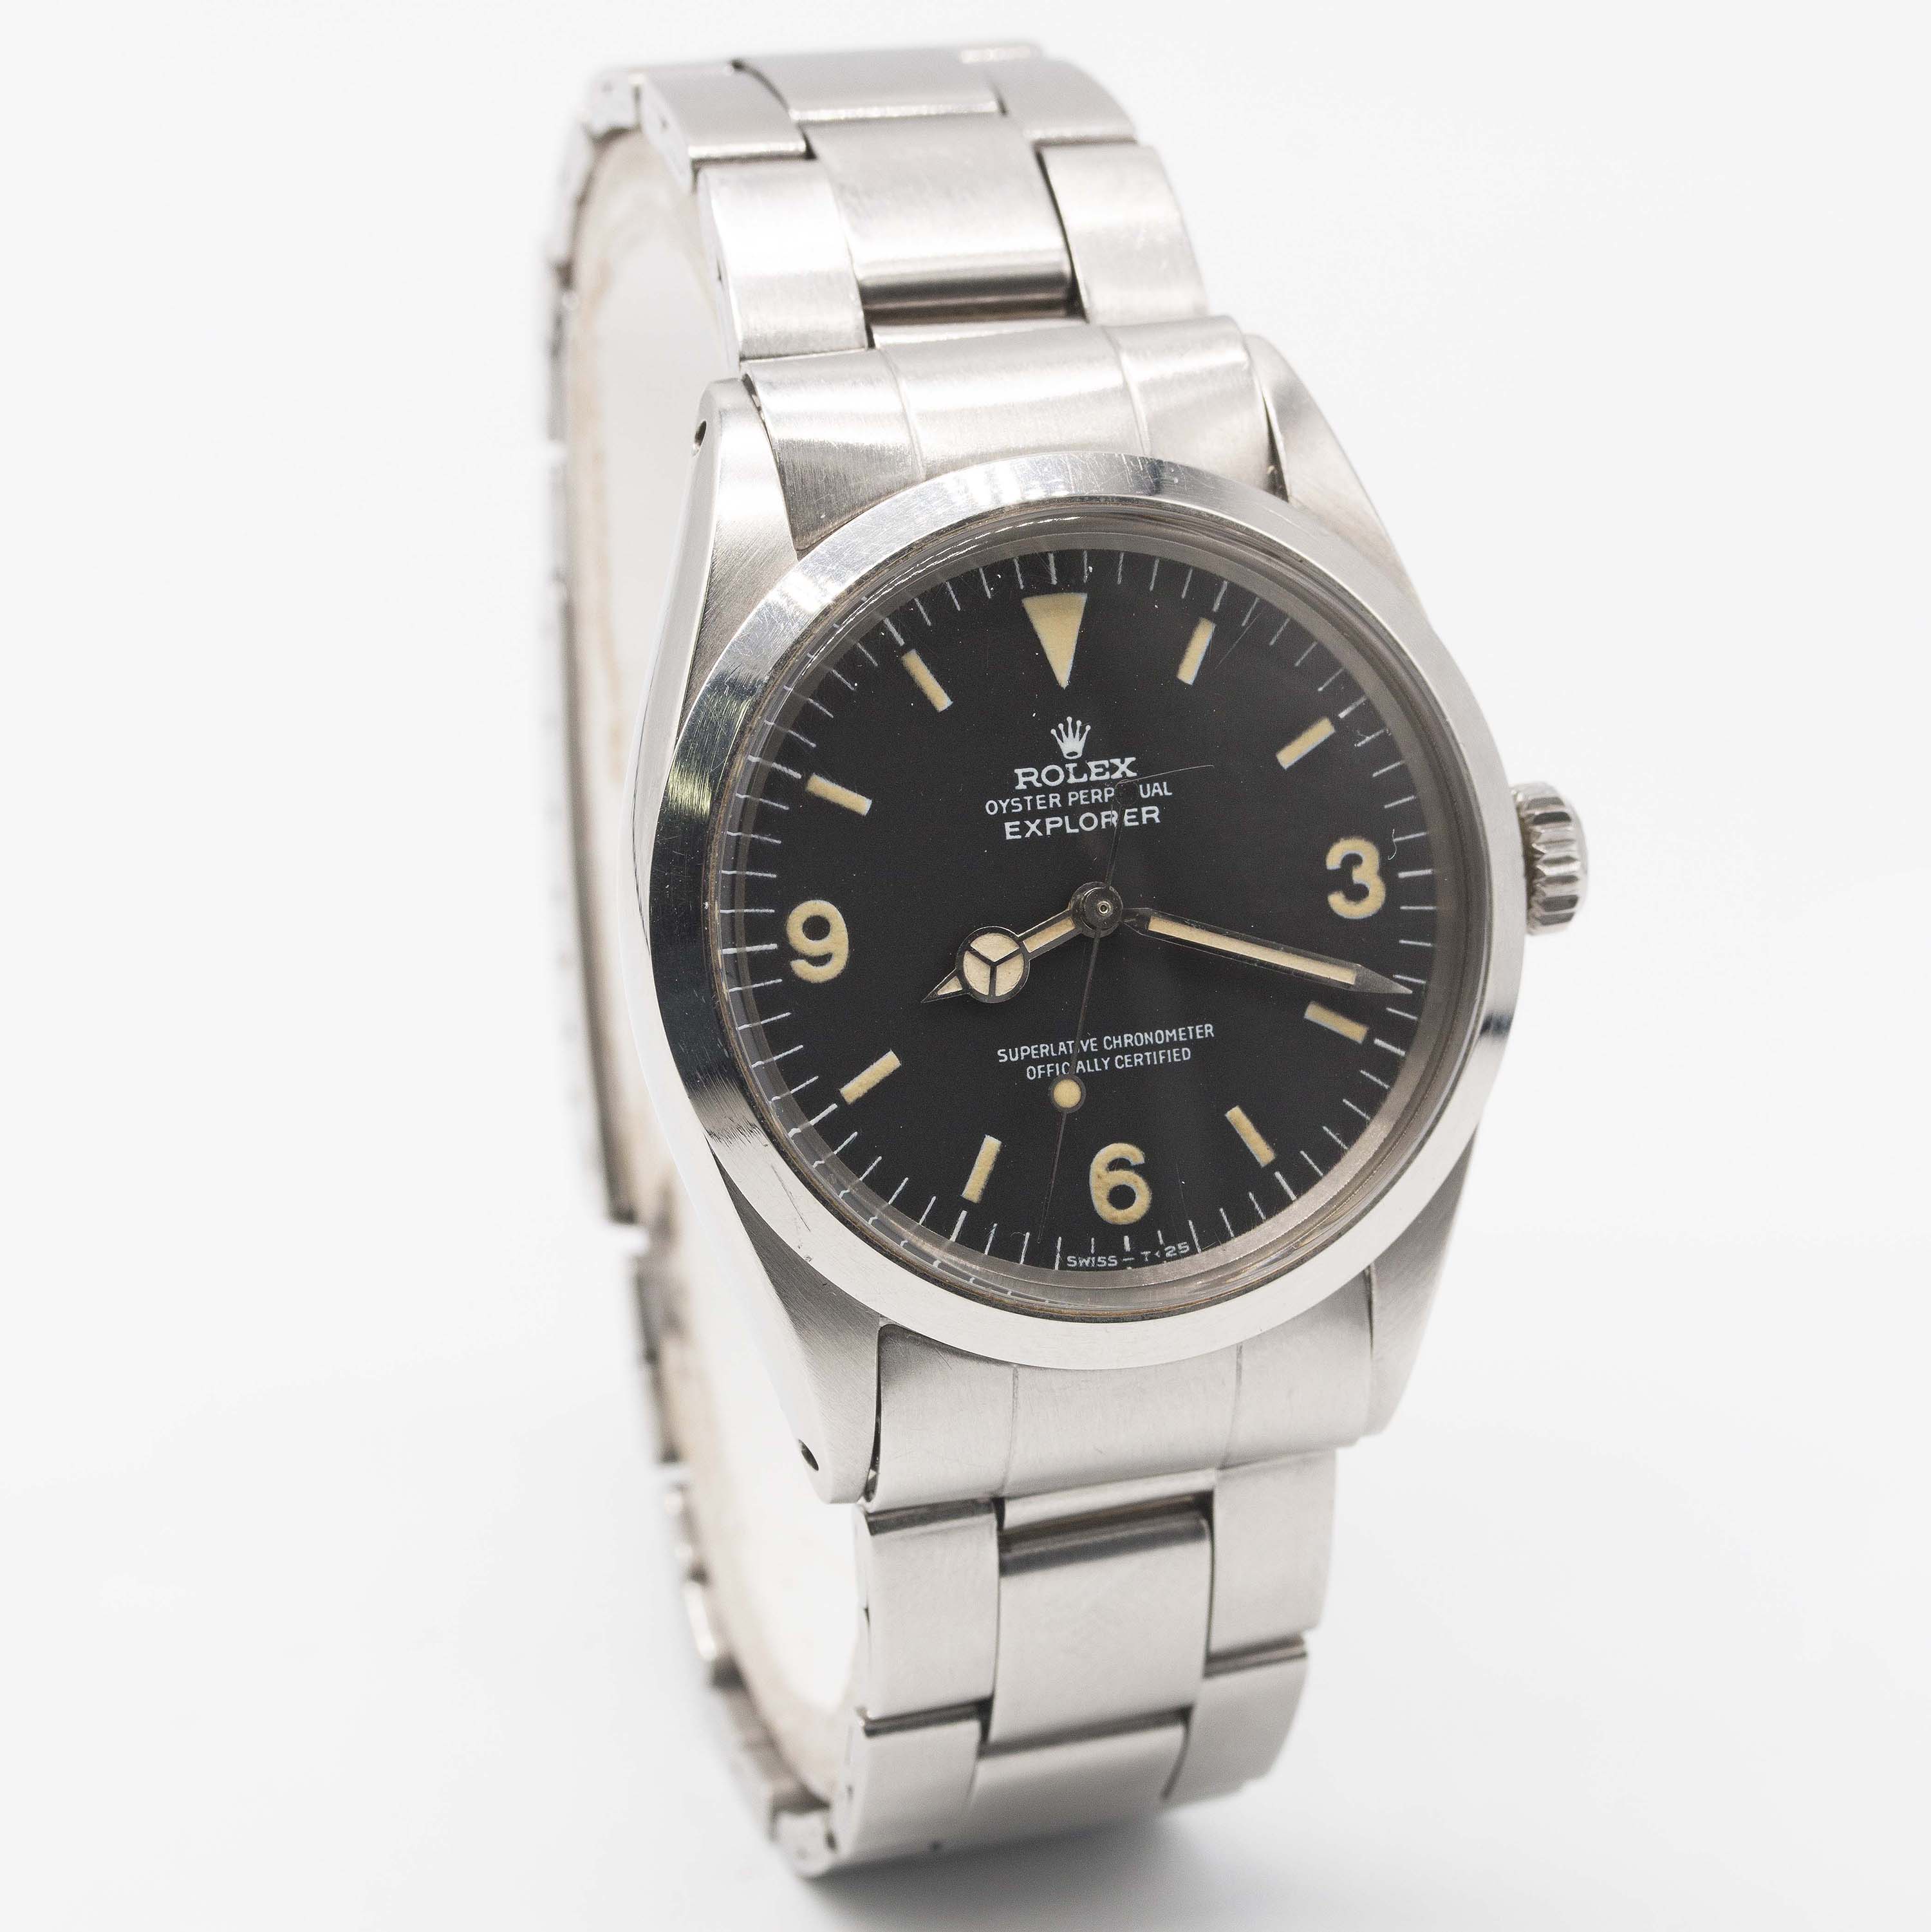 A RARE GENTLEMAN'S STAINLESS STEEL ROLEX OYSTER PERPETUAL EXPLORER BRACELET WATCH CIRCA 1972, REF. - Image 7 of 13